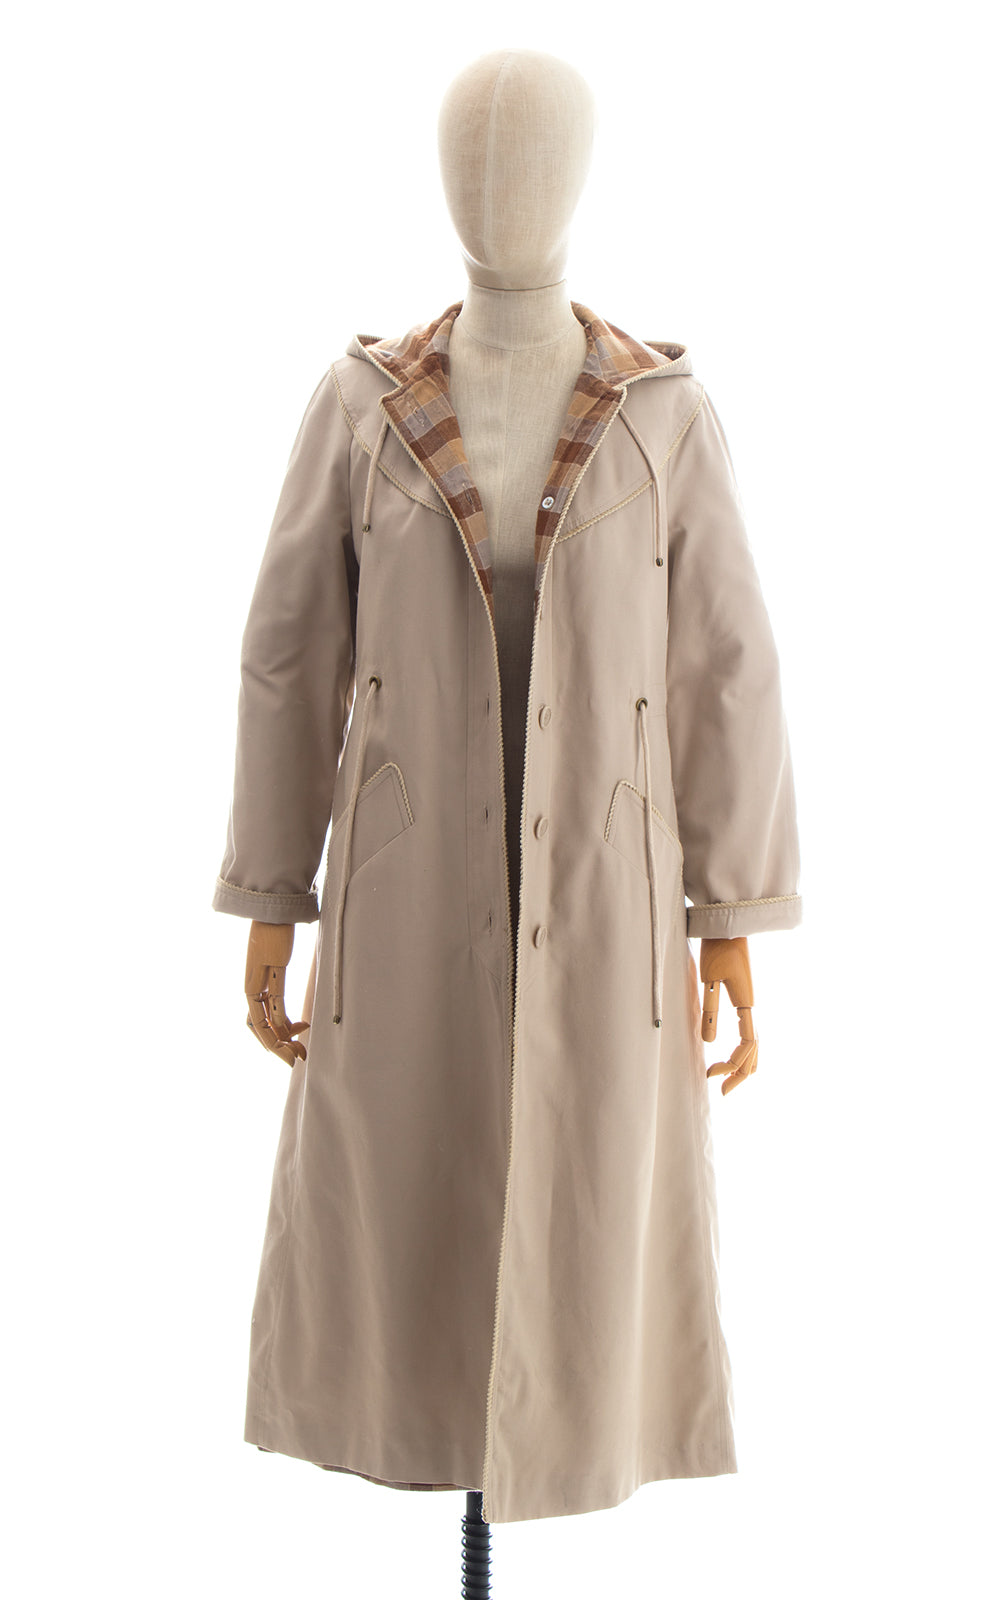 1970s Tan Hooded Trench Coat with Plaid Flannel Lining